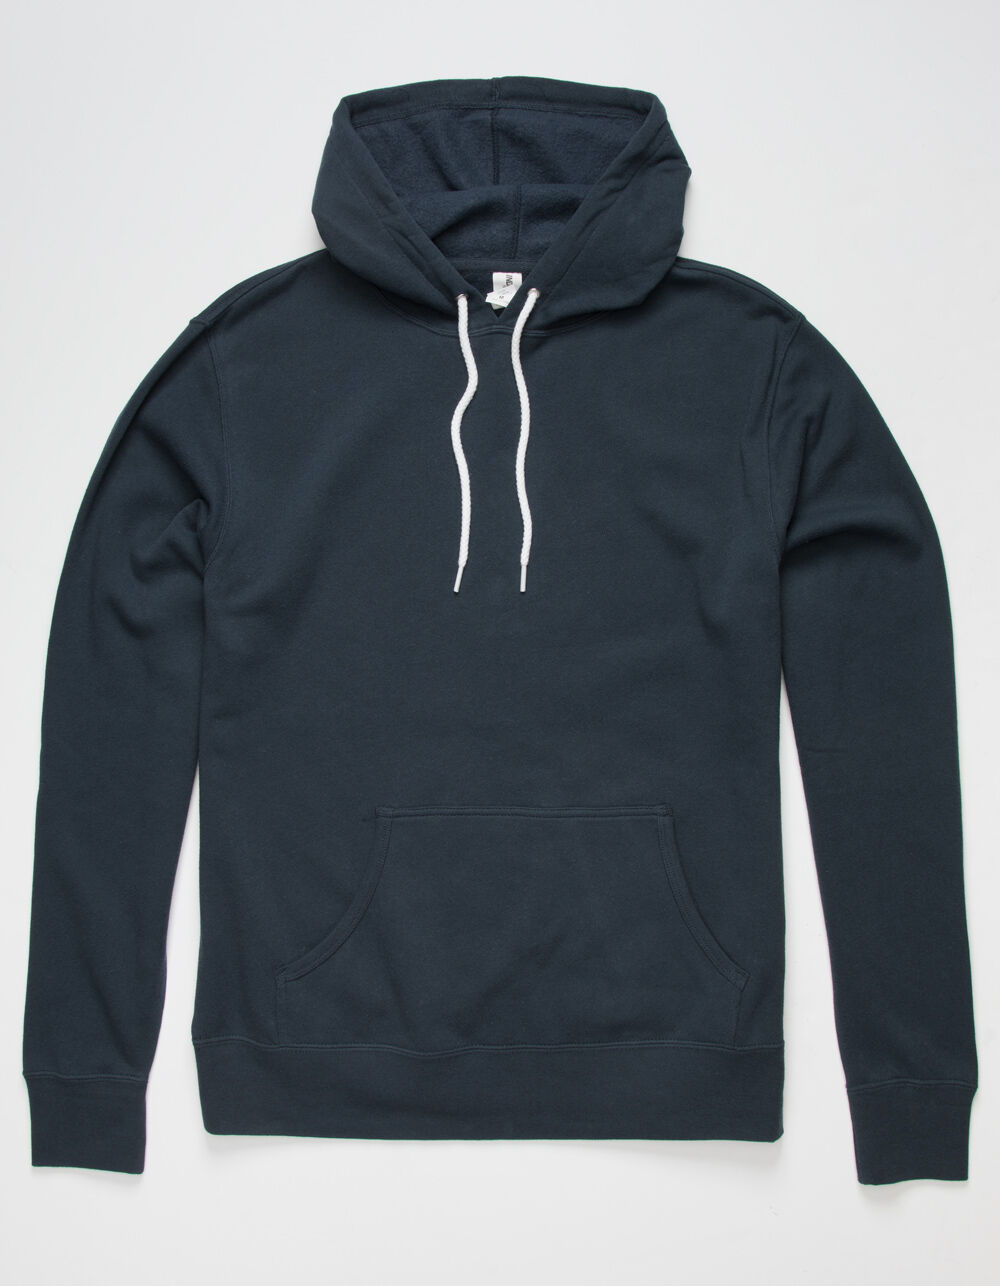 INDEPENDENT TRADING COMPANYINDEPENDENT TRADING COMPANY Dark Navy Hoodie ...